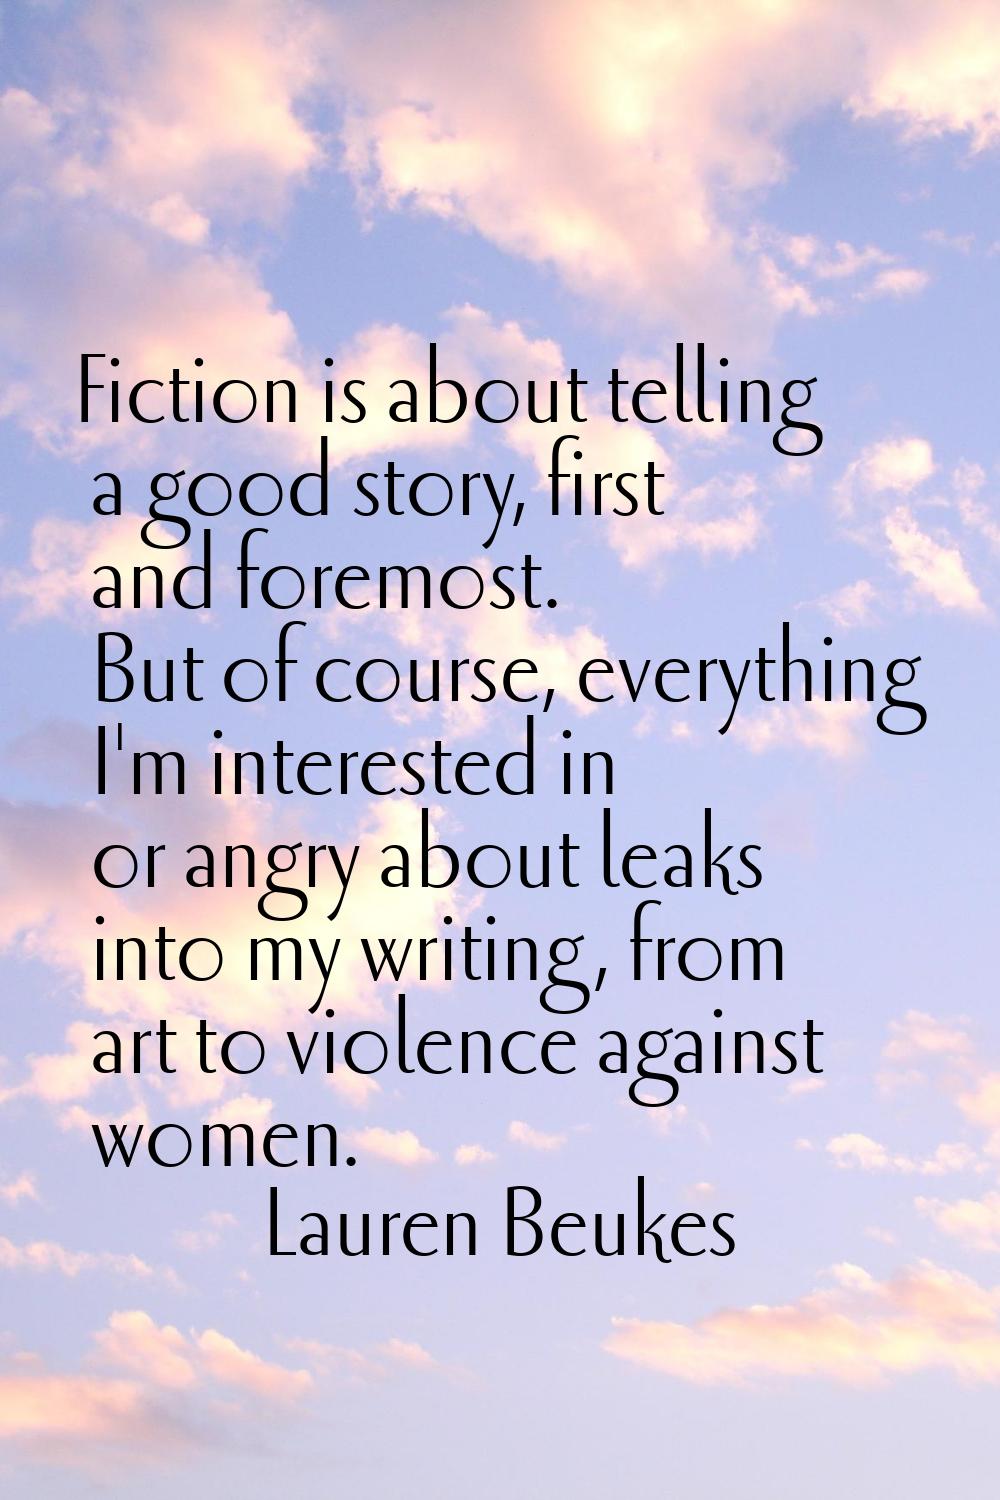 Fiction is about telling a good story, first and foremost. But of course, everything I'm interested